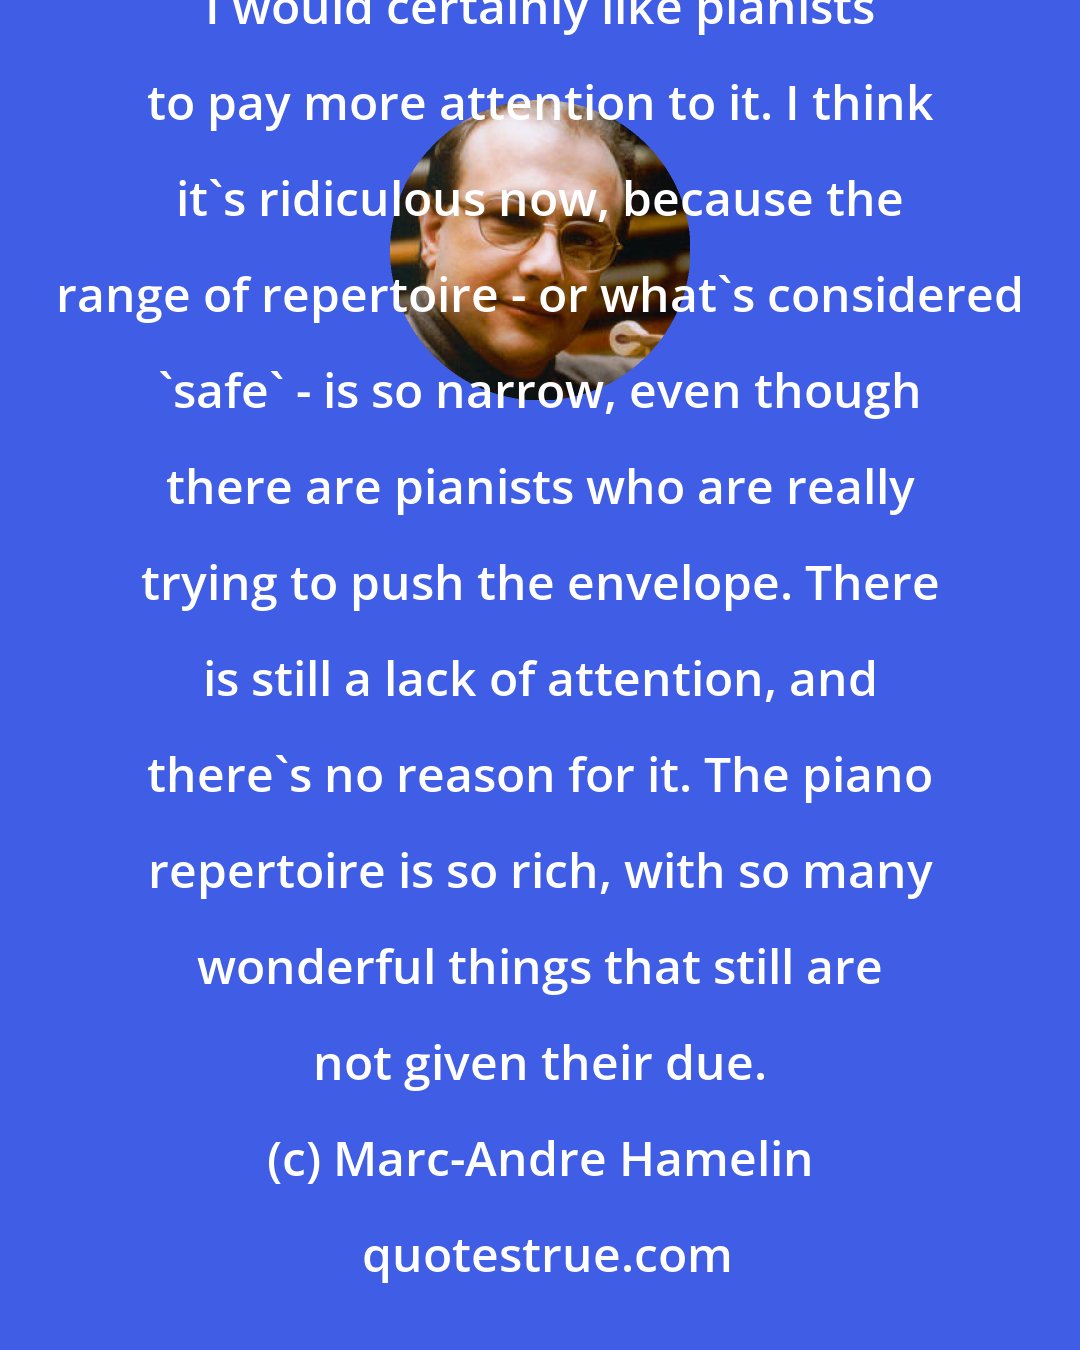 Marc-Andre Hamelin: Whenever I record something, I always believe that it's worthy of inclusion in the pantheon, and I would certainly like pianists to pay more attention to it. I think it's ridiculous now, because the range of repertoire - or what's considered 'safe' - is so narrow, even though there are pianists who are really trying to push the envelope. There is still a lack of attention, and there's no reason for it. The piano repertoire is so rich, with so many wonderful things that still are not given their due.